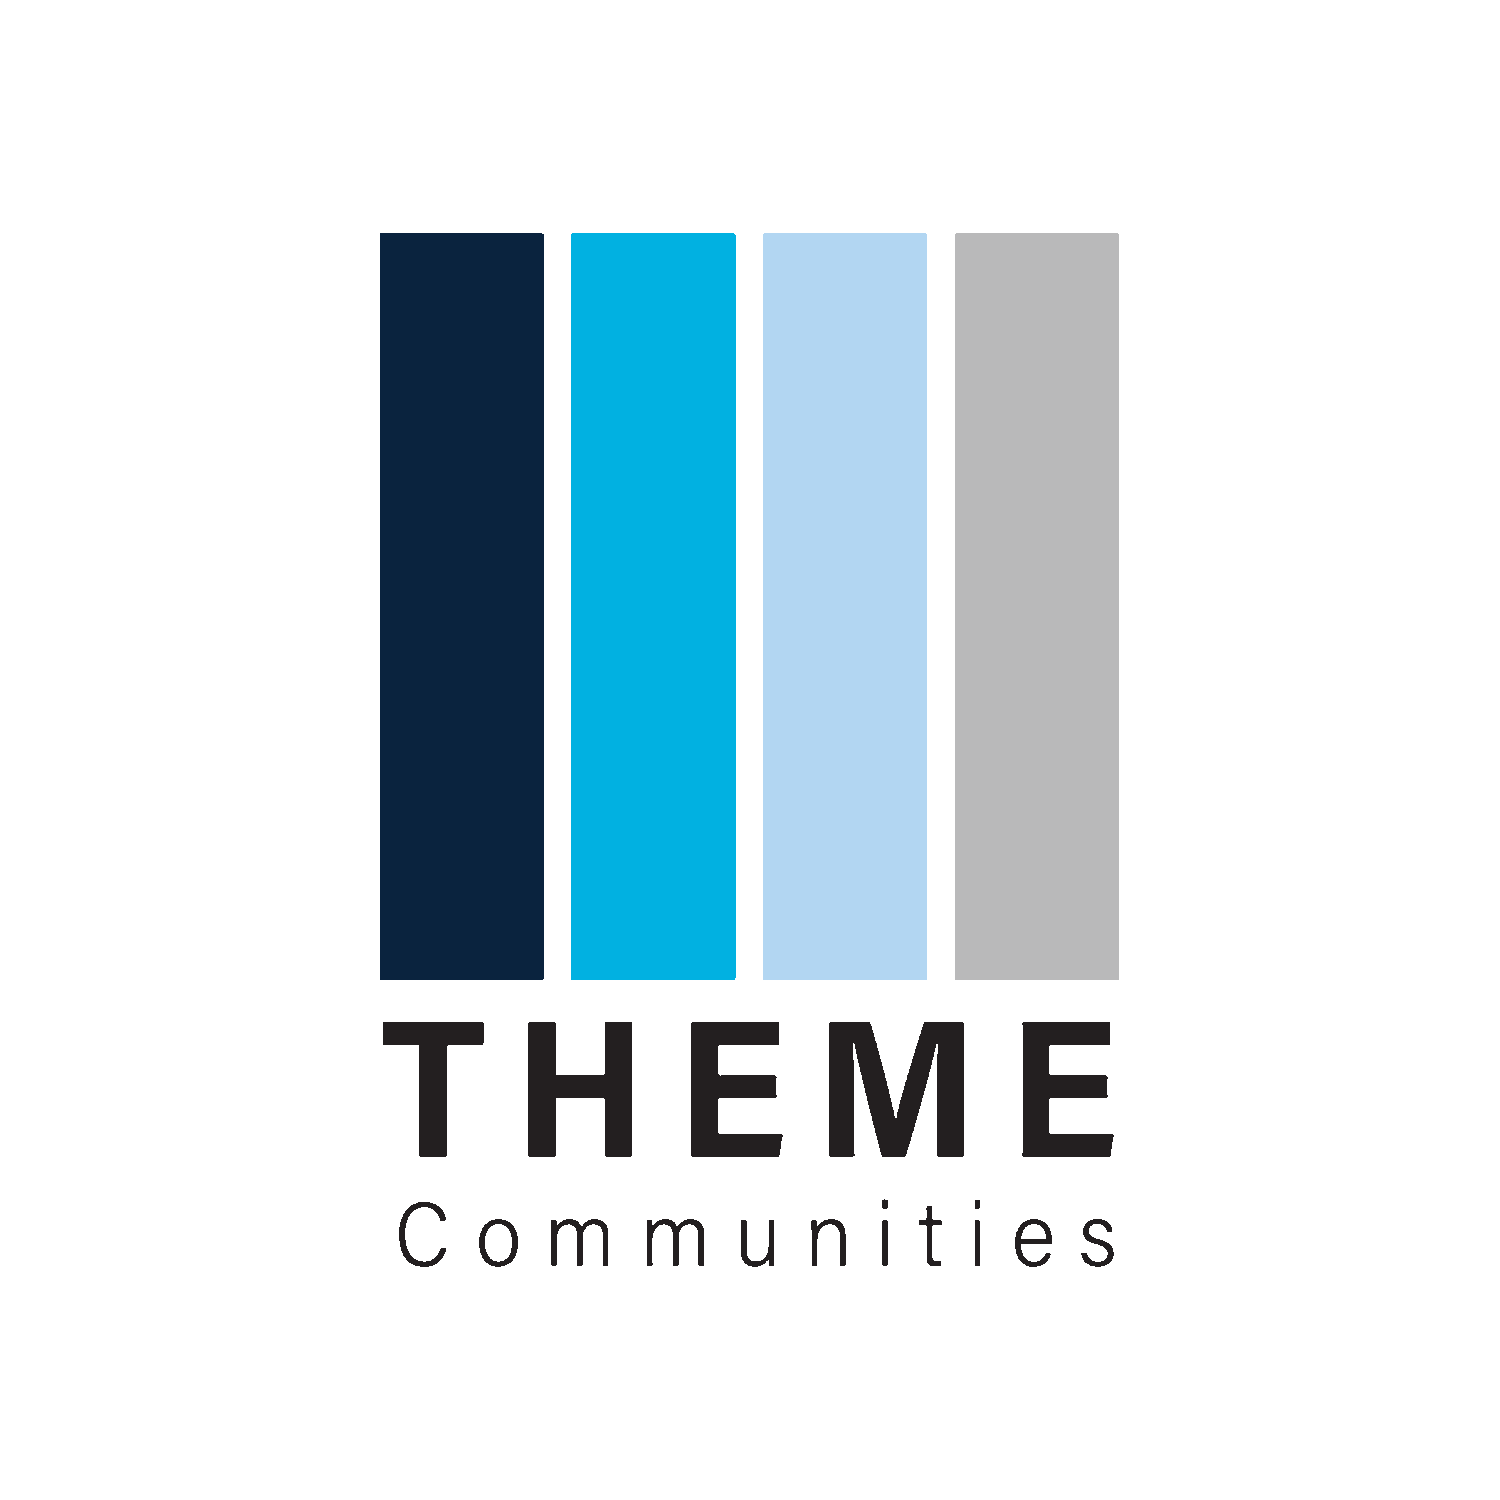 theme community graphic with UNF blue and gray colors